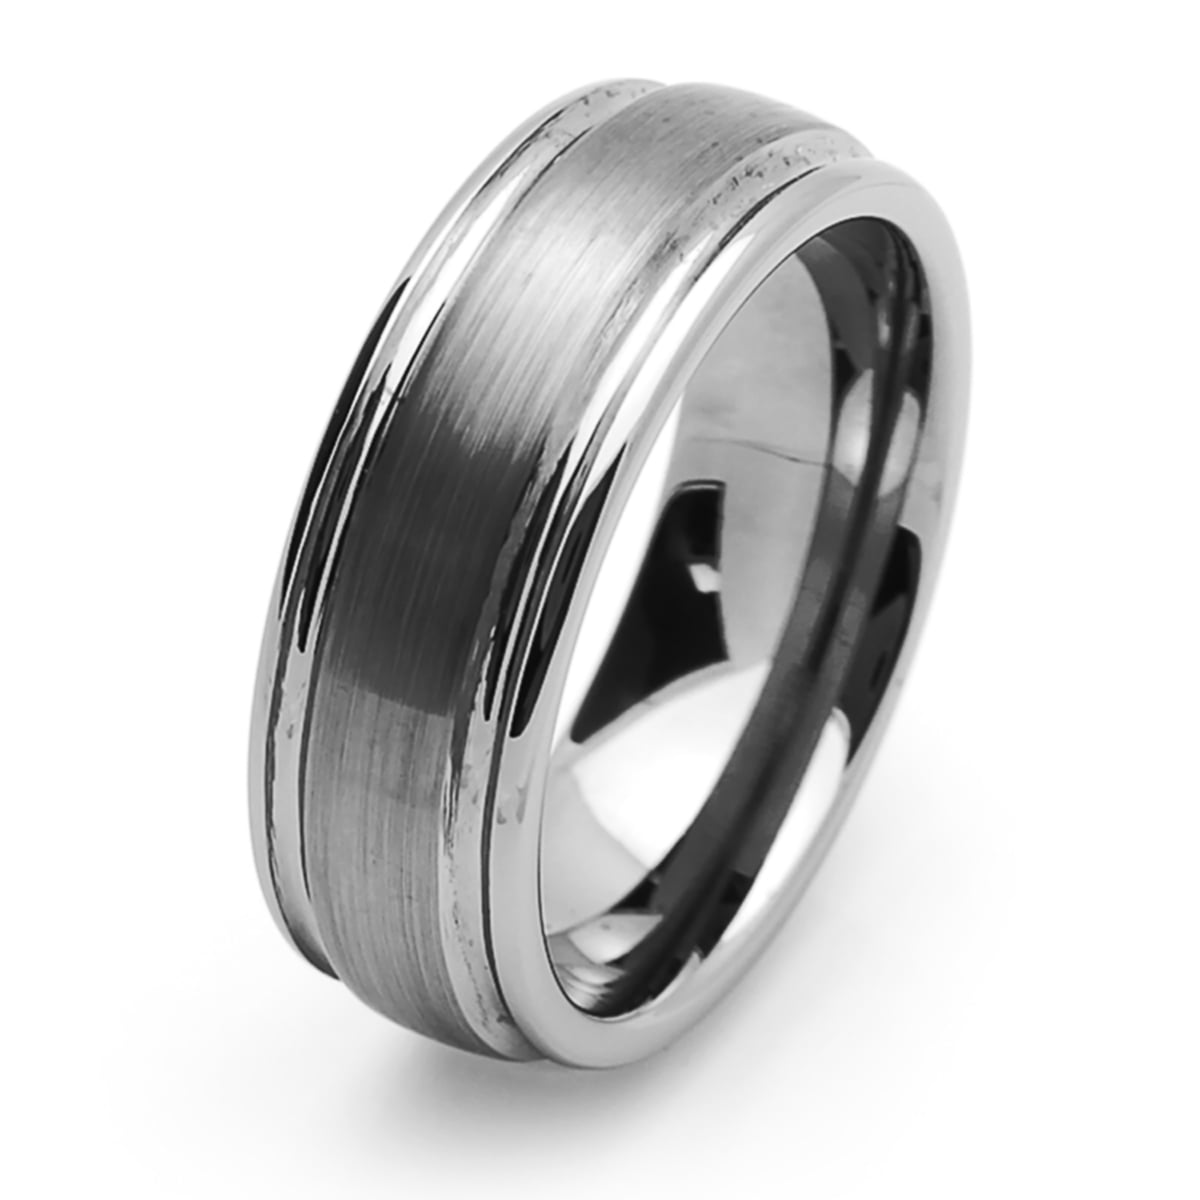 Free Engraving 8mm Tungsten Carbide Domed Classic Brushed Finish Wedding Band Ring for Him Or Her 